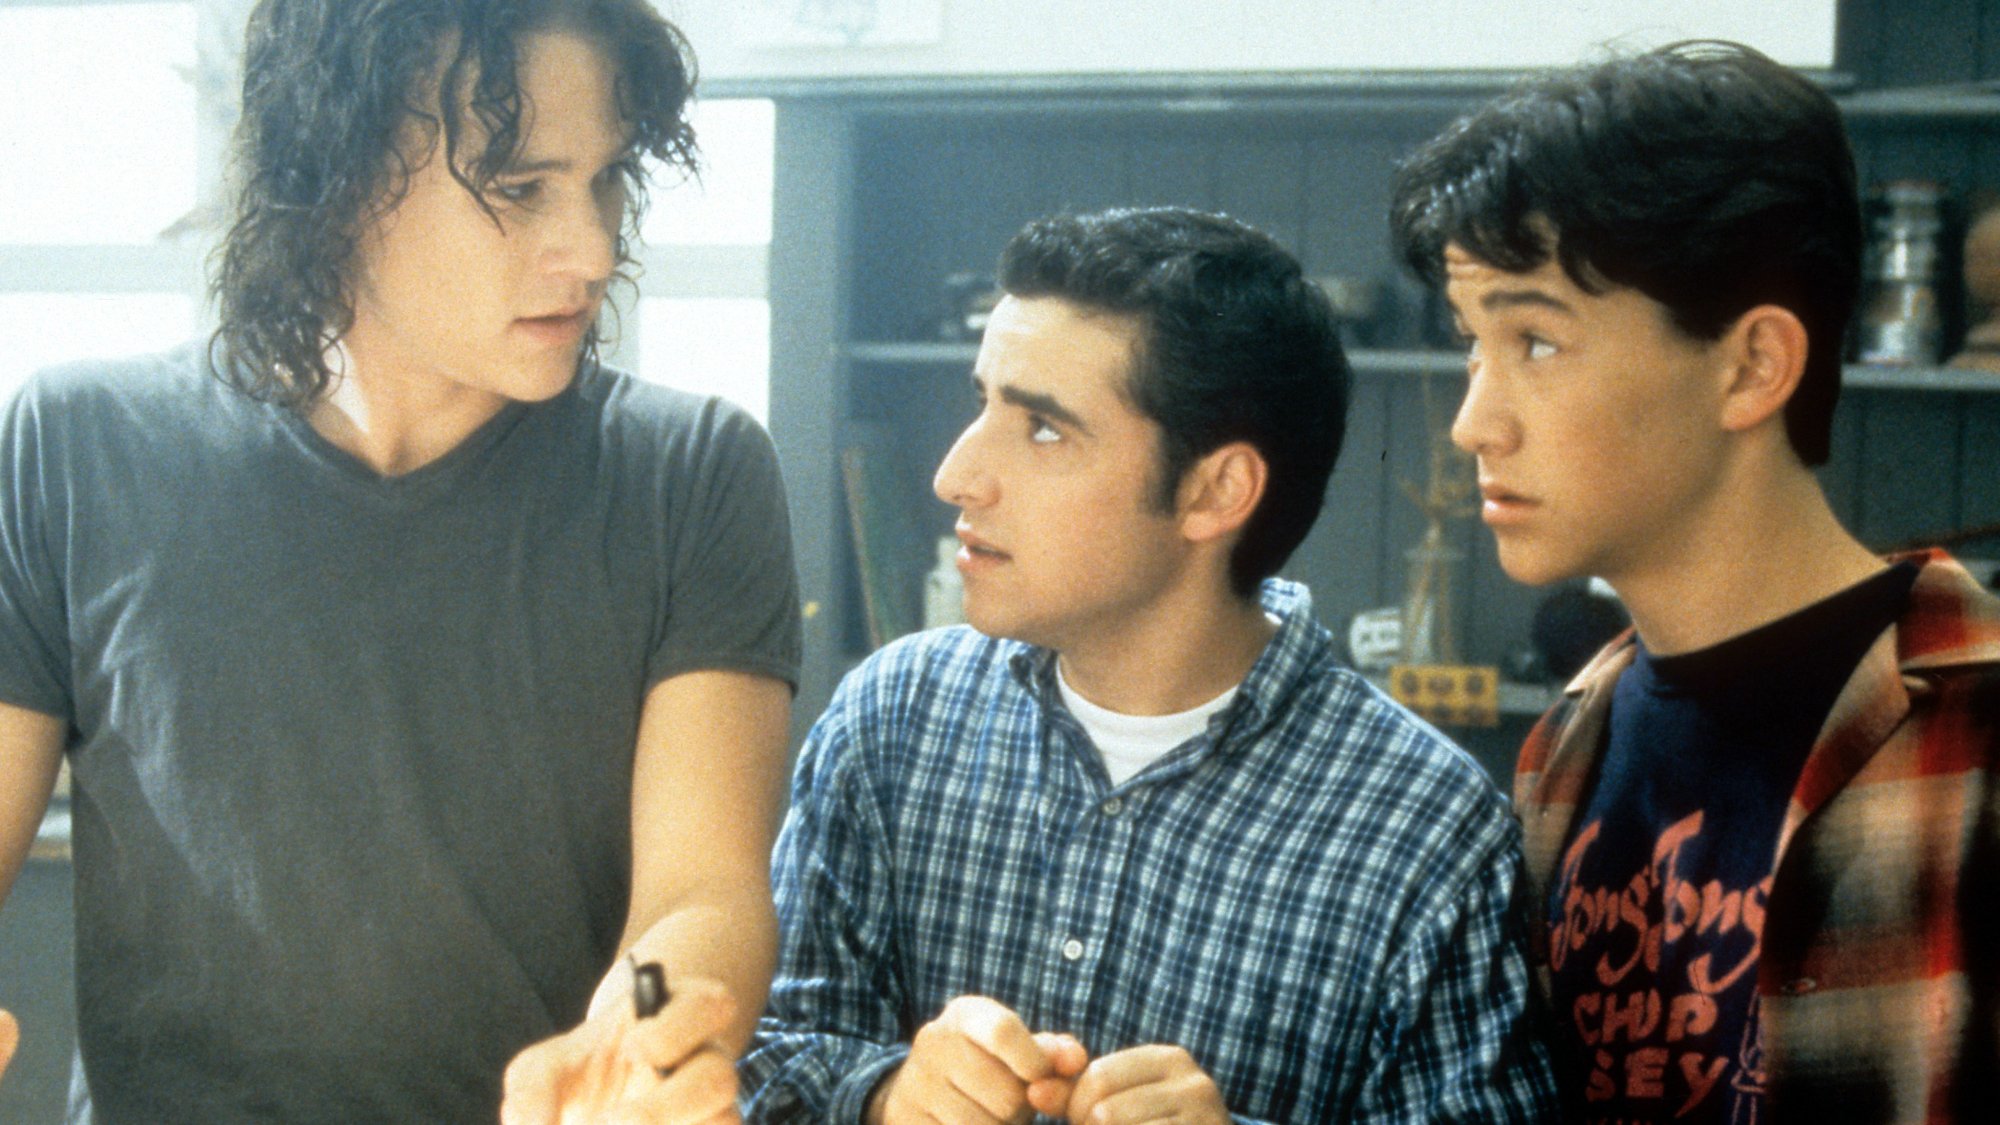 Patrick, Michael, and Cameron hatch a plan in "10 Things I Hate About You."